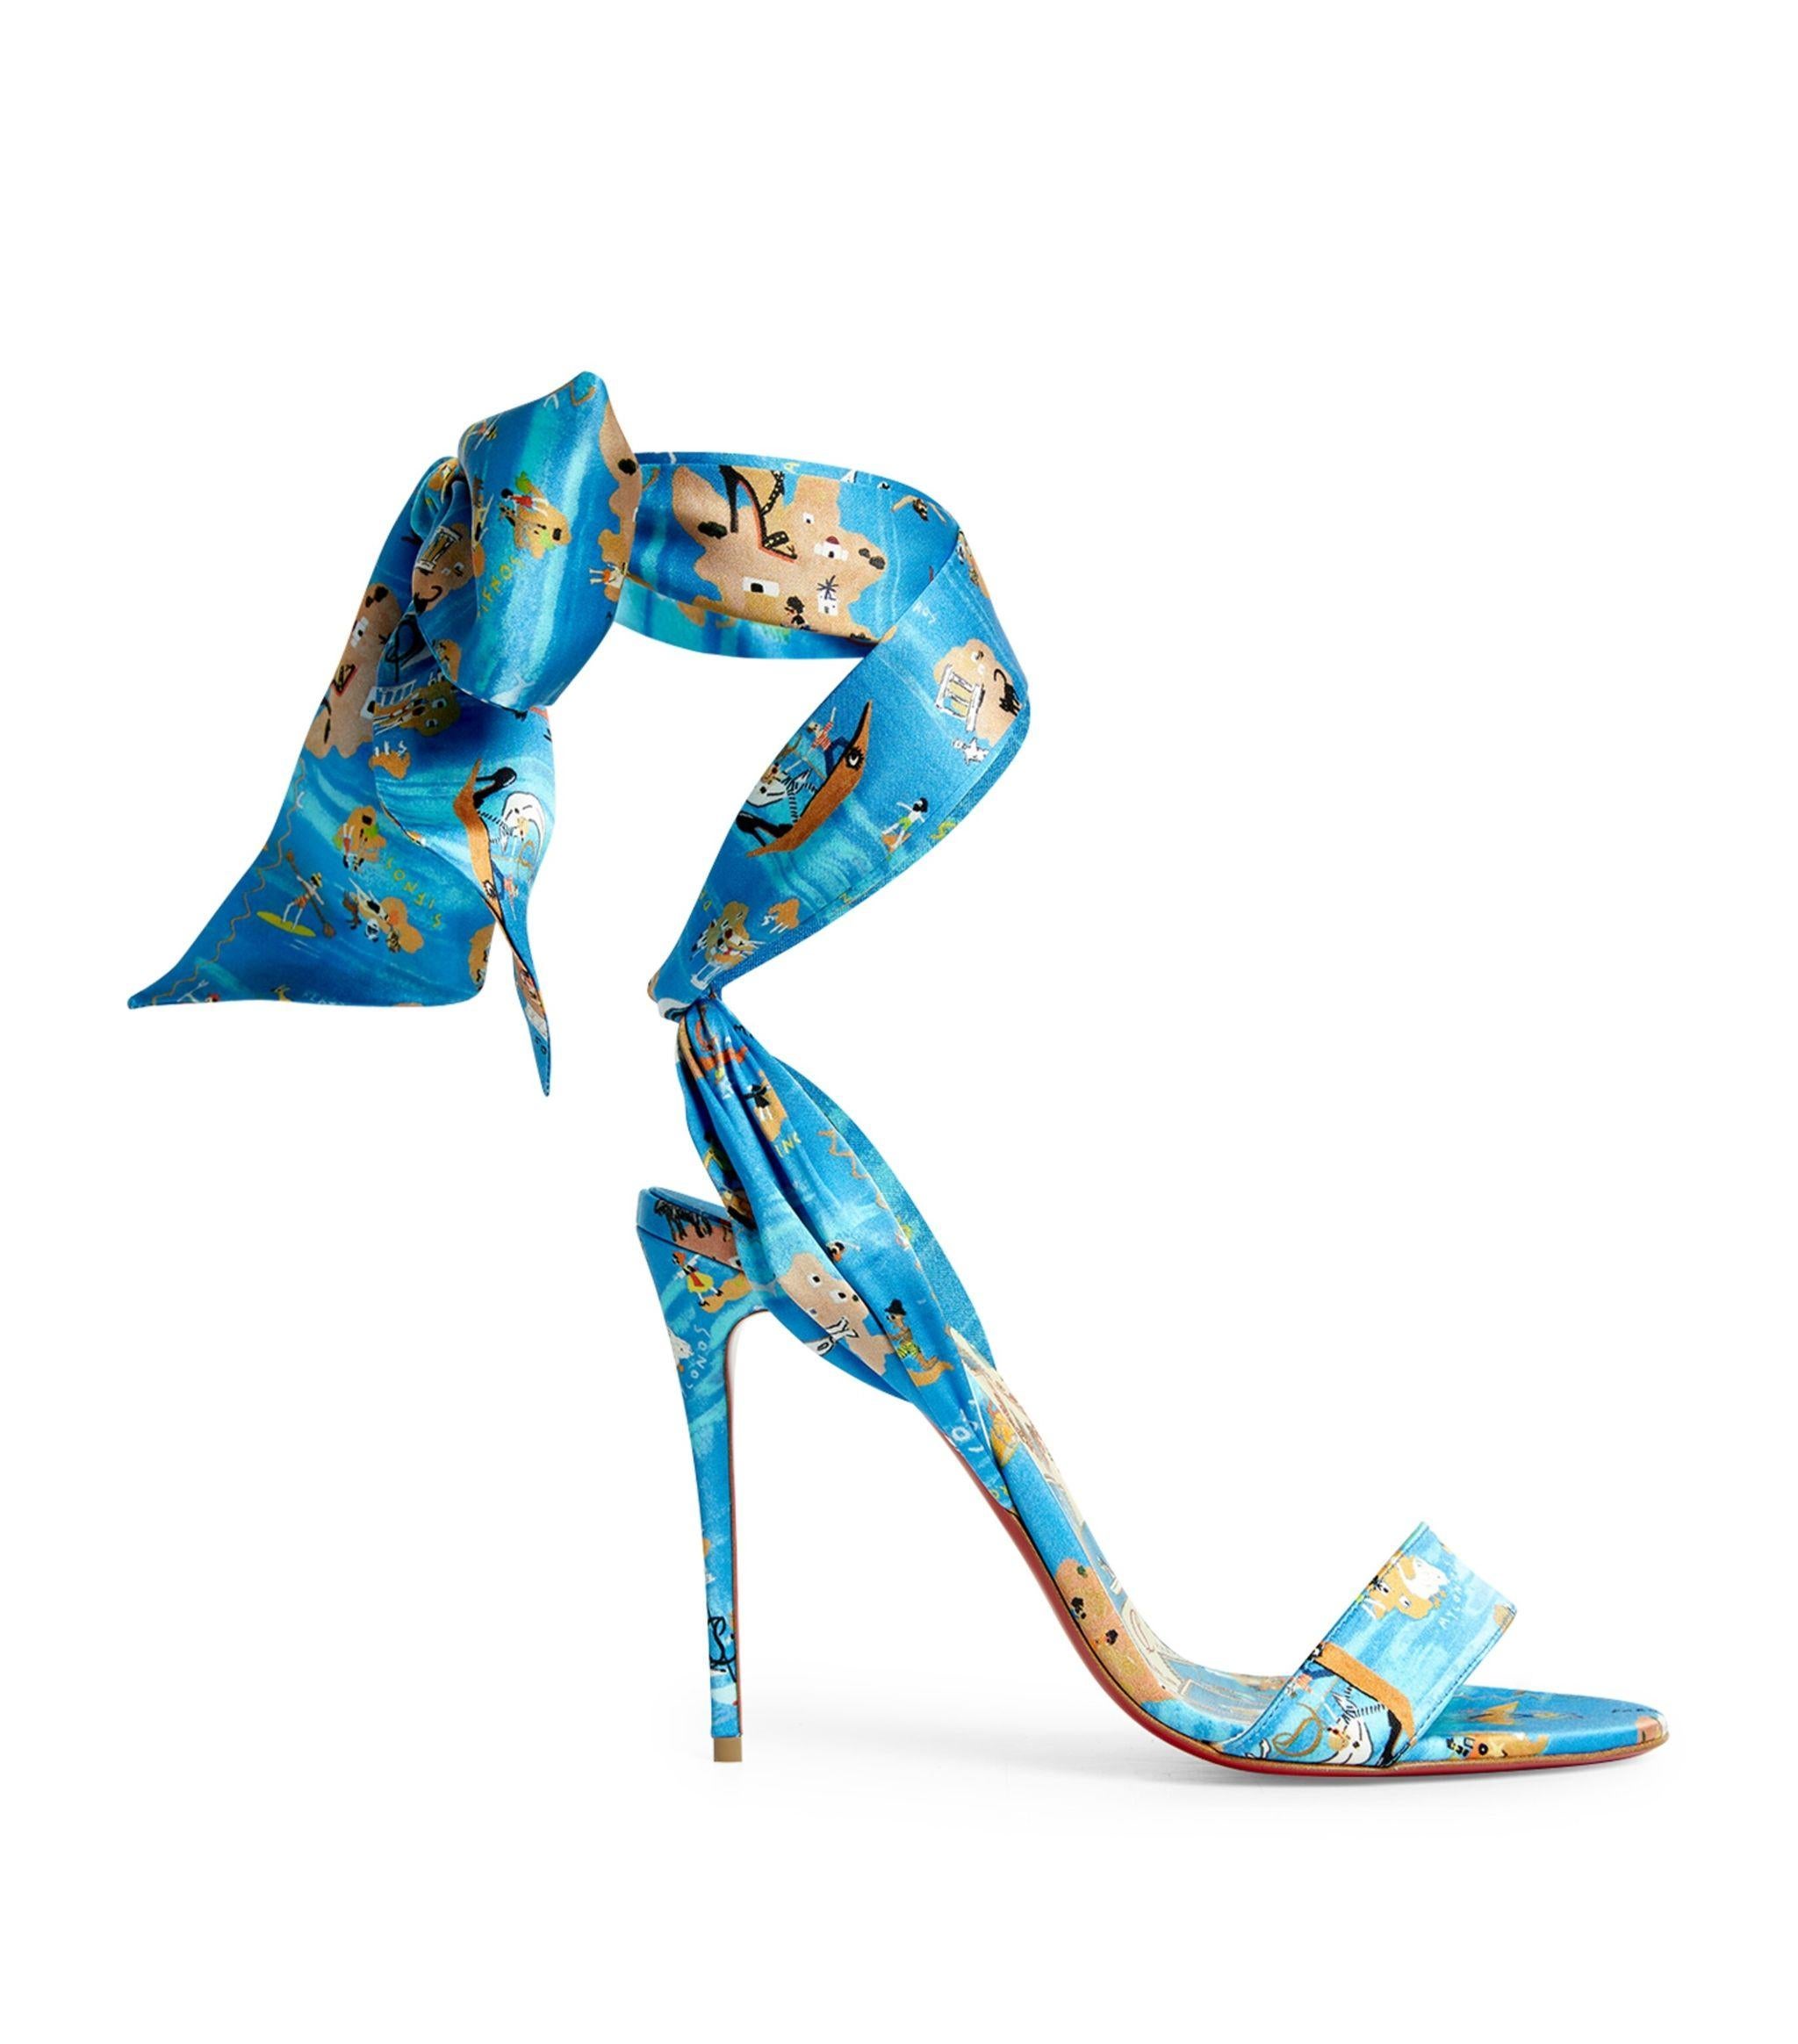 These chic stylish heels are crafted of Loubi Odyssey blue patterned crepe satin, inspired by the Greek islands. These have a 4-inch wrapped sharp stiletto, adjustable ribbon ankle ties and an open toe.